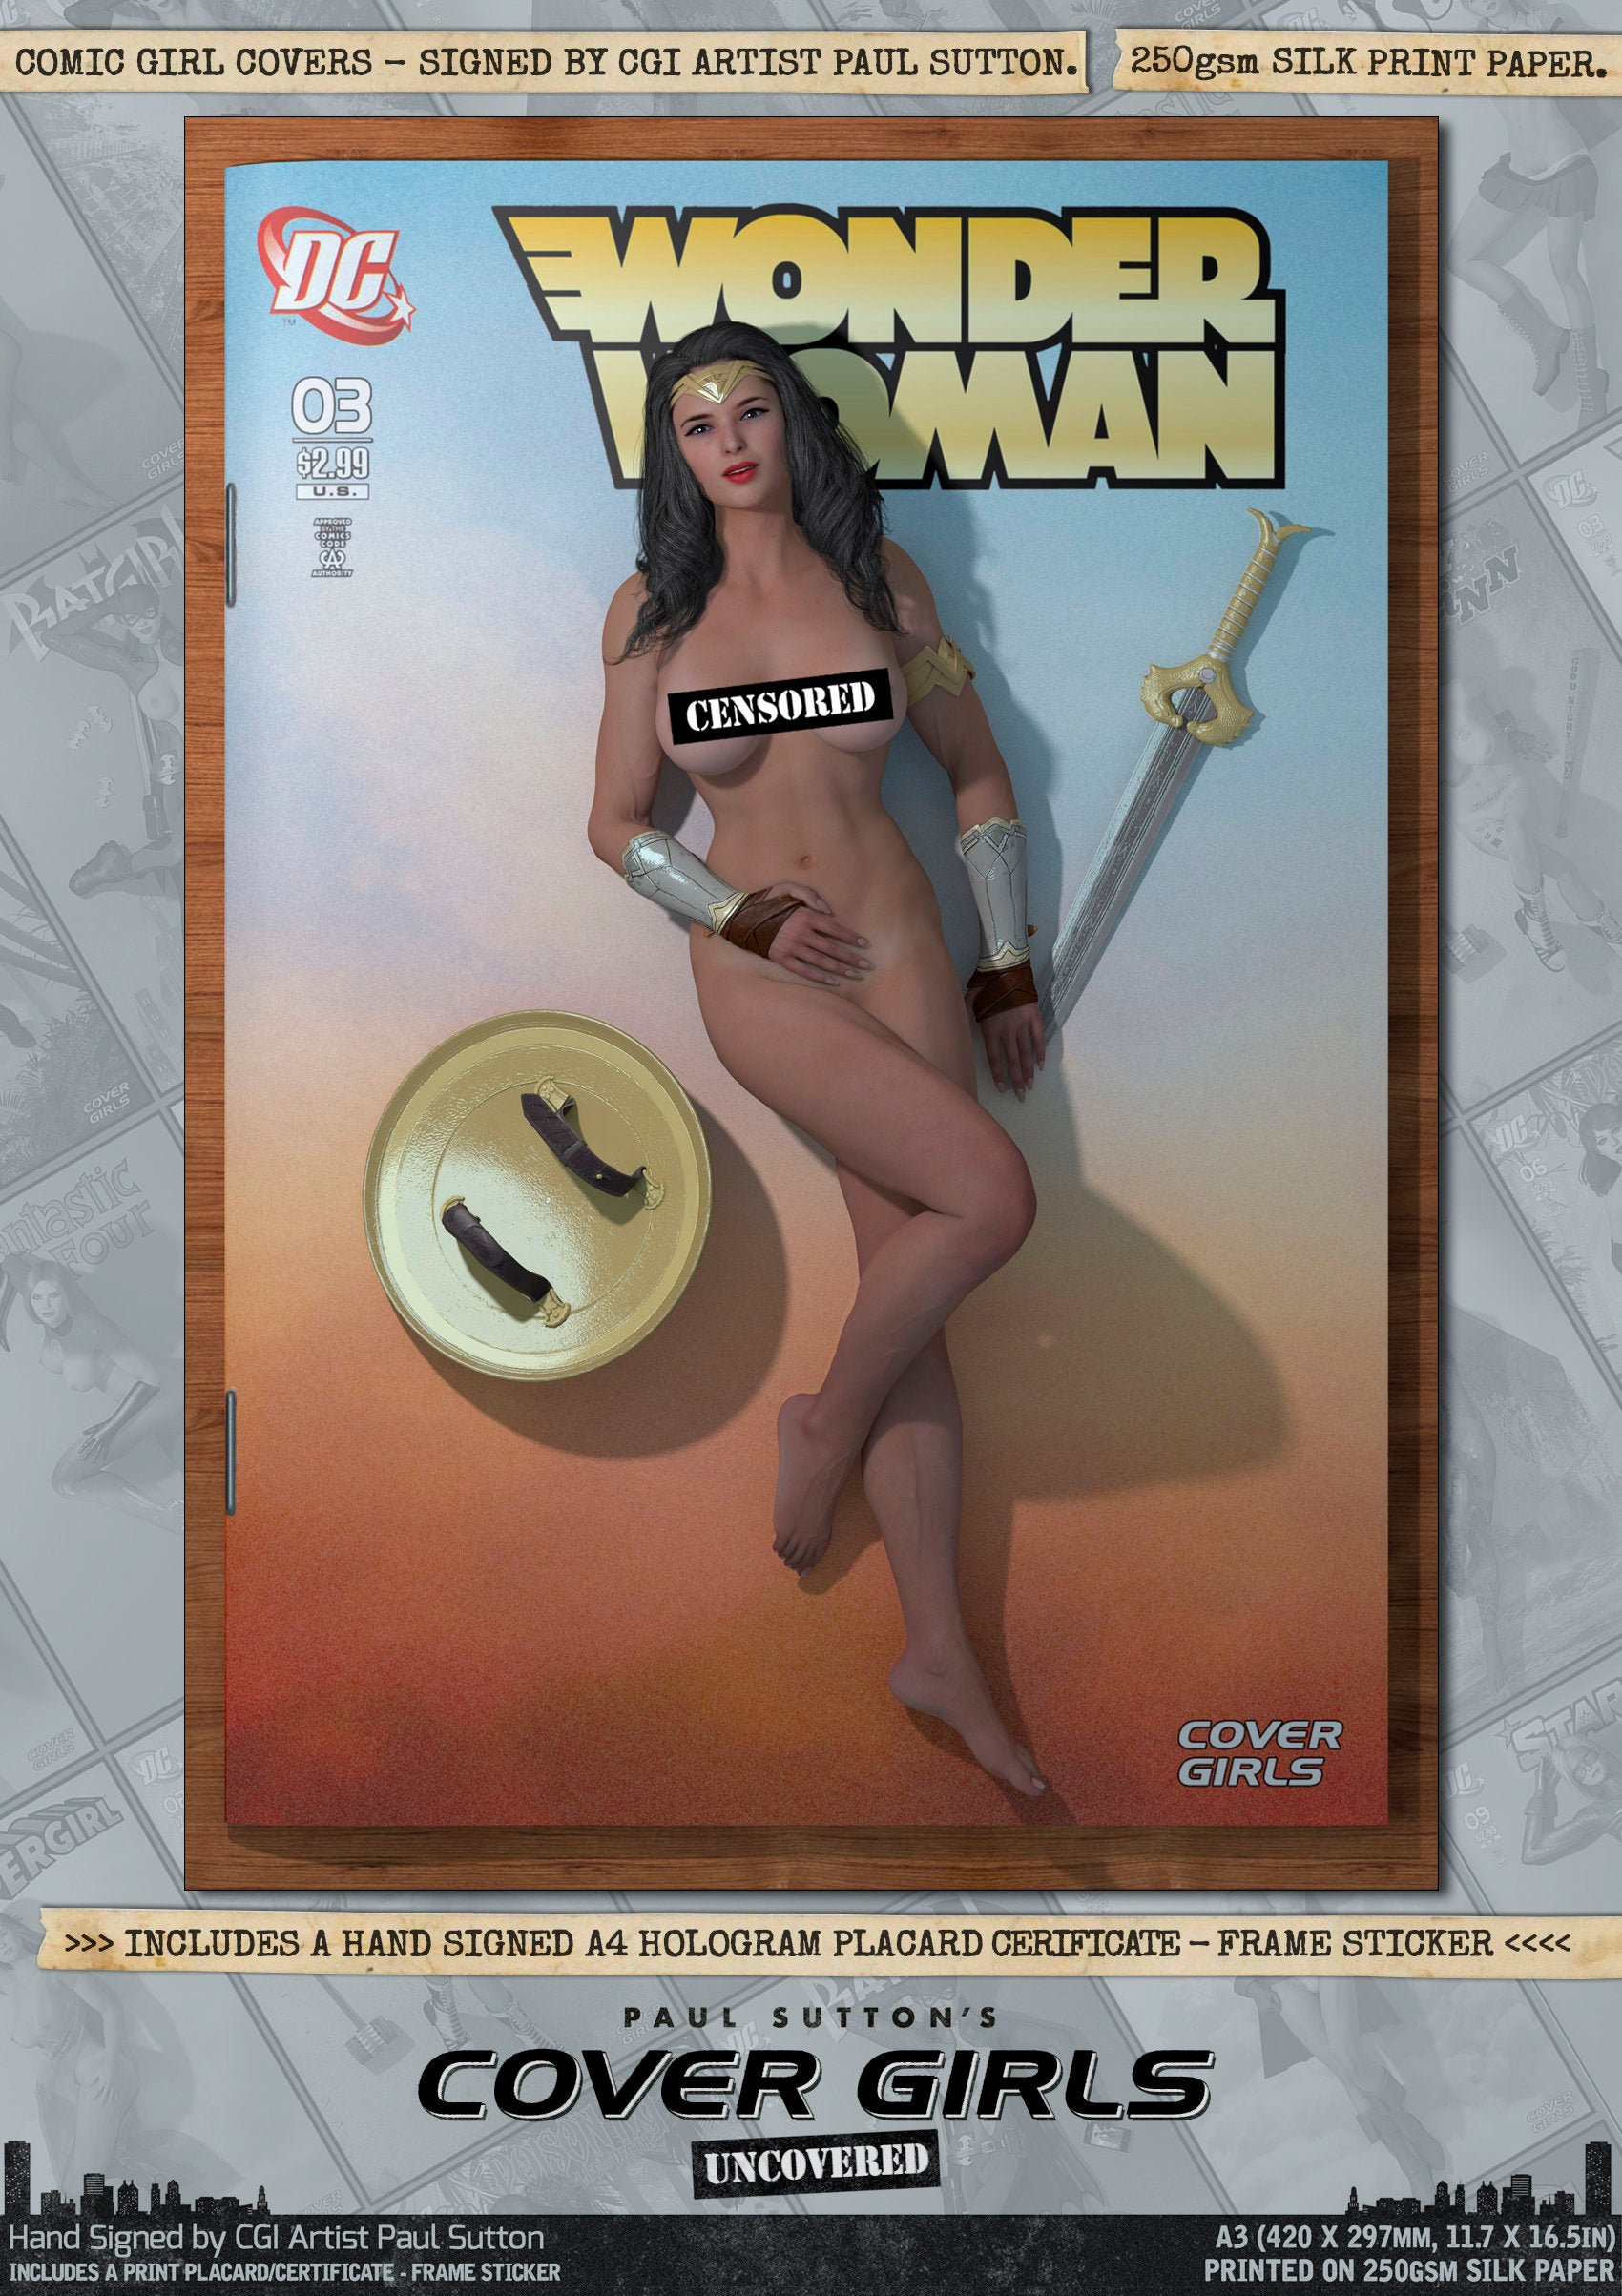 Wonder Woman Gal Gadot NUDE Pin-up Cover Girls Uncovered Sexy DC Superhero  Comic Cover Print Signed by CGI Artist Paul Sutton - Etsy Hong Kong